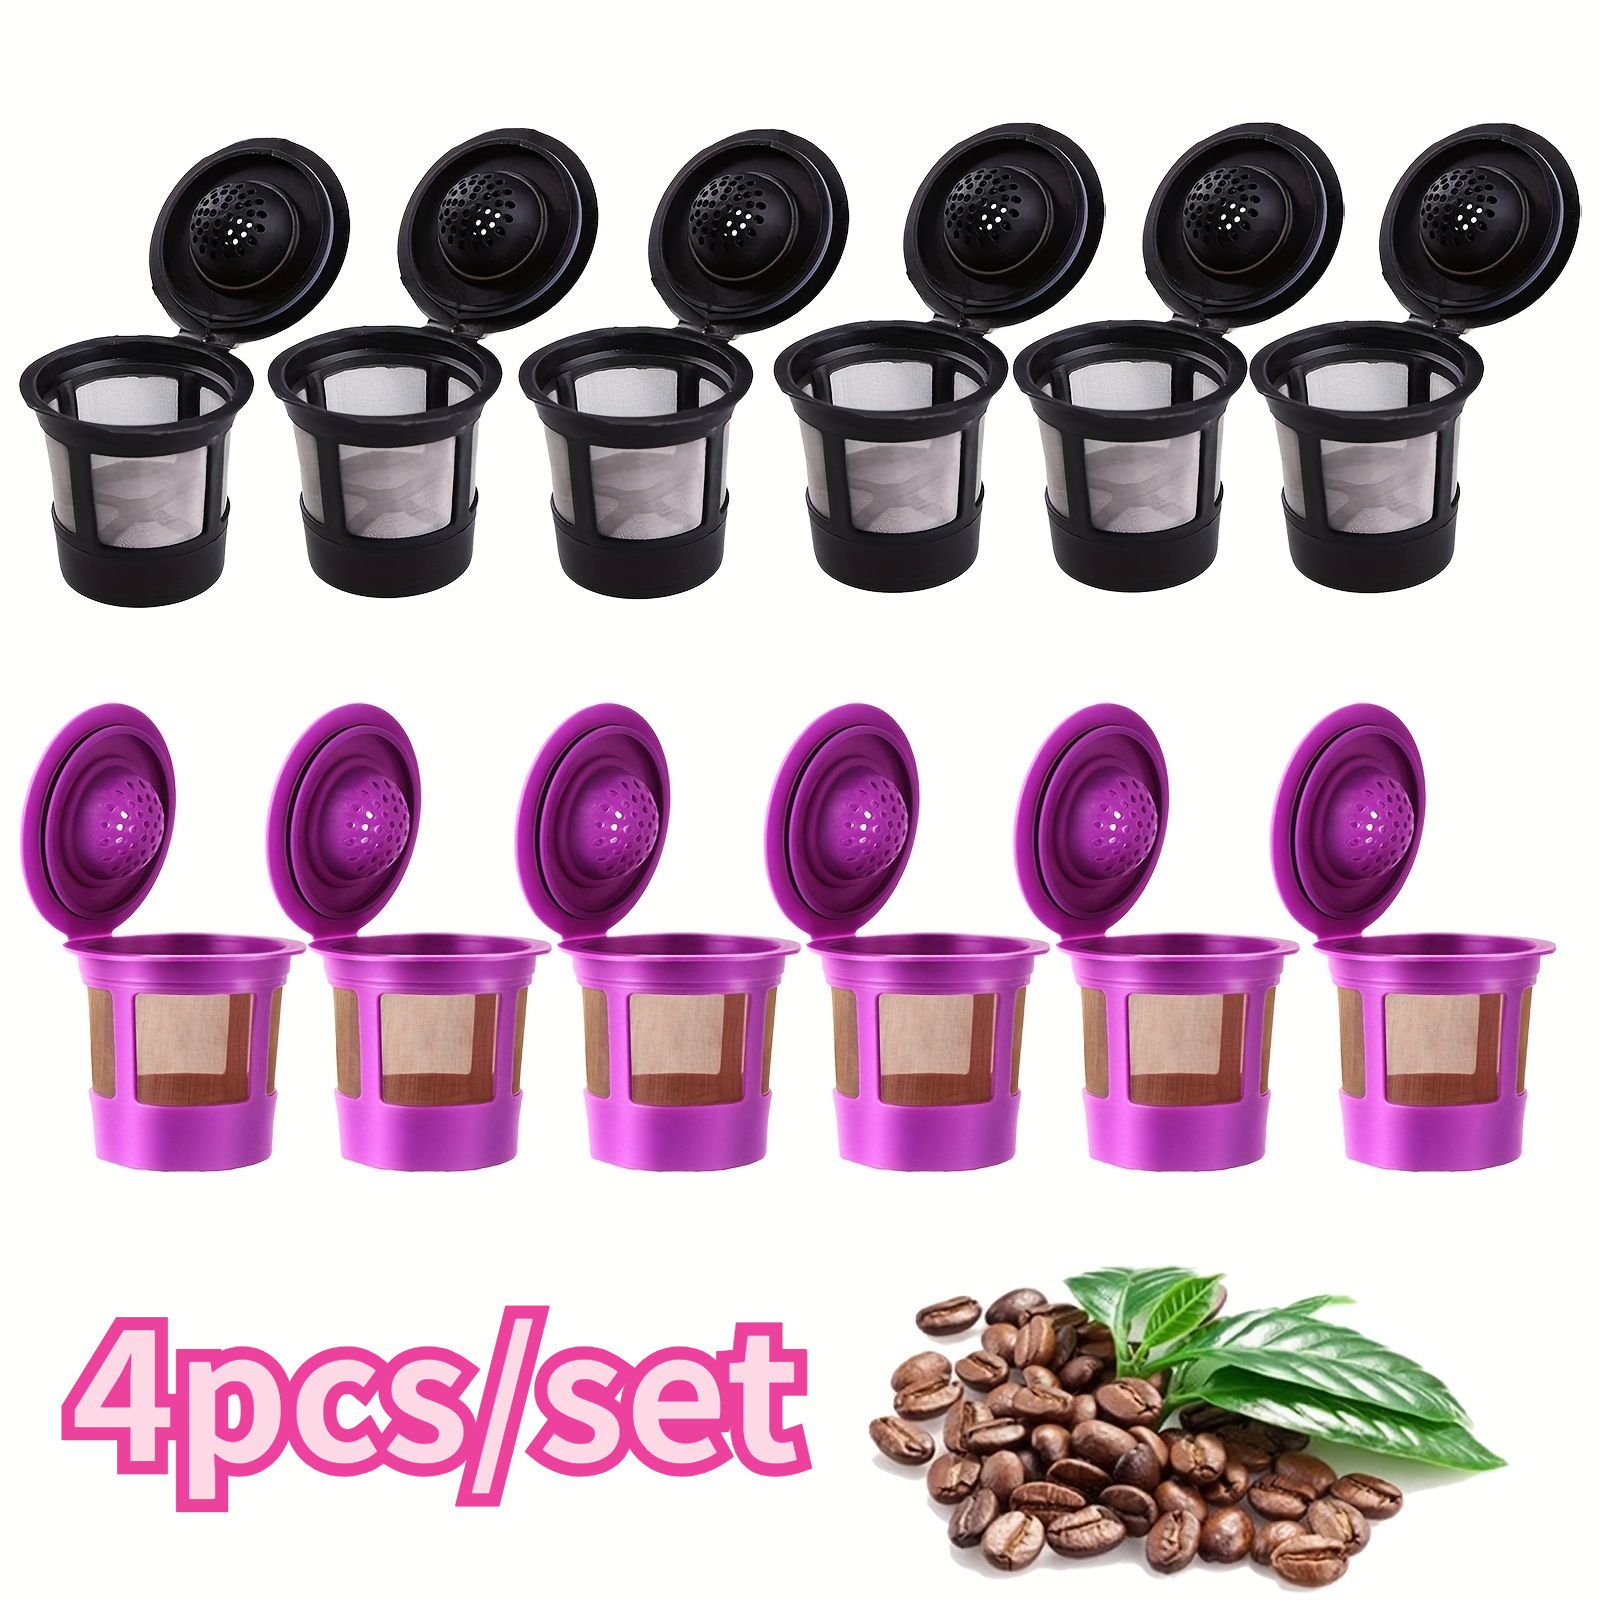 

4pcs/set Reusable K Cups For Keurig Coffee Makers, Bpa Free Universal Fit Purple Refillable Kcups Coffee Filters For 1.0 And 2.0 Keurig Brewers